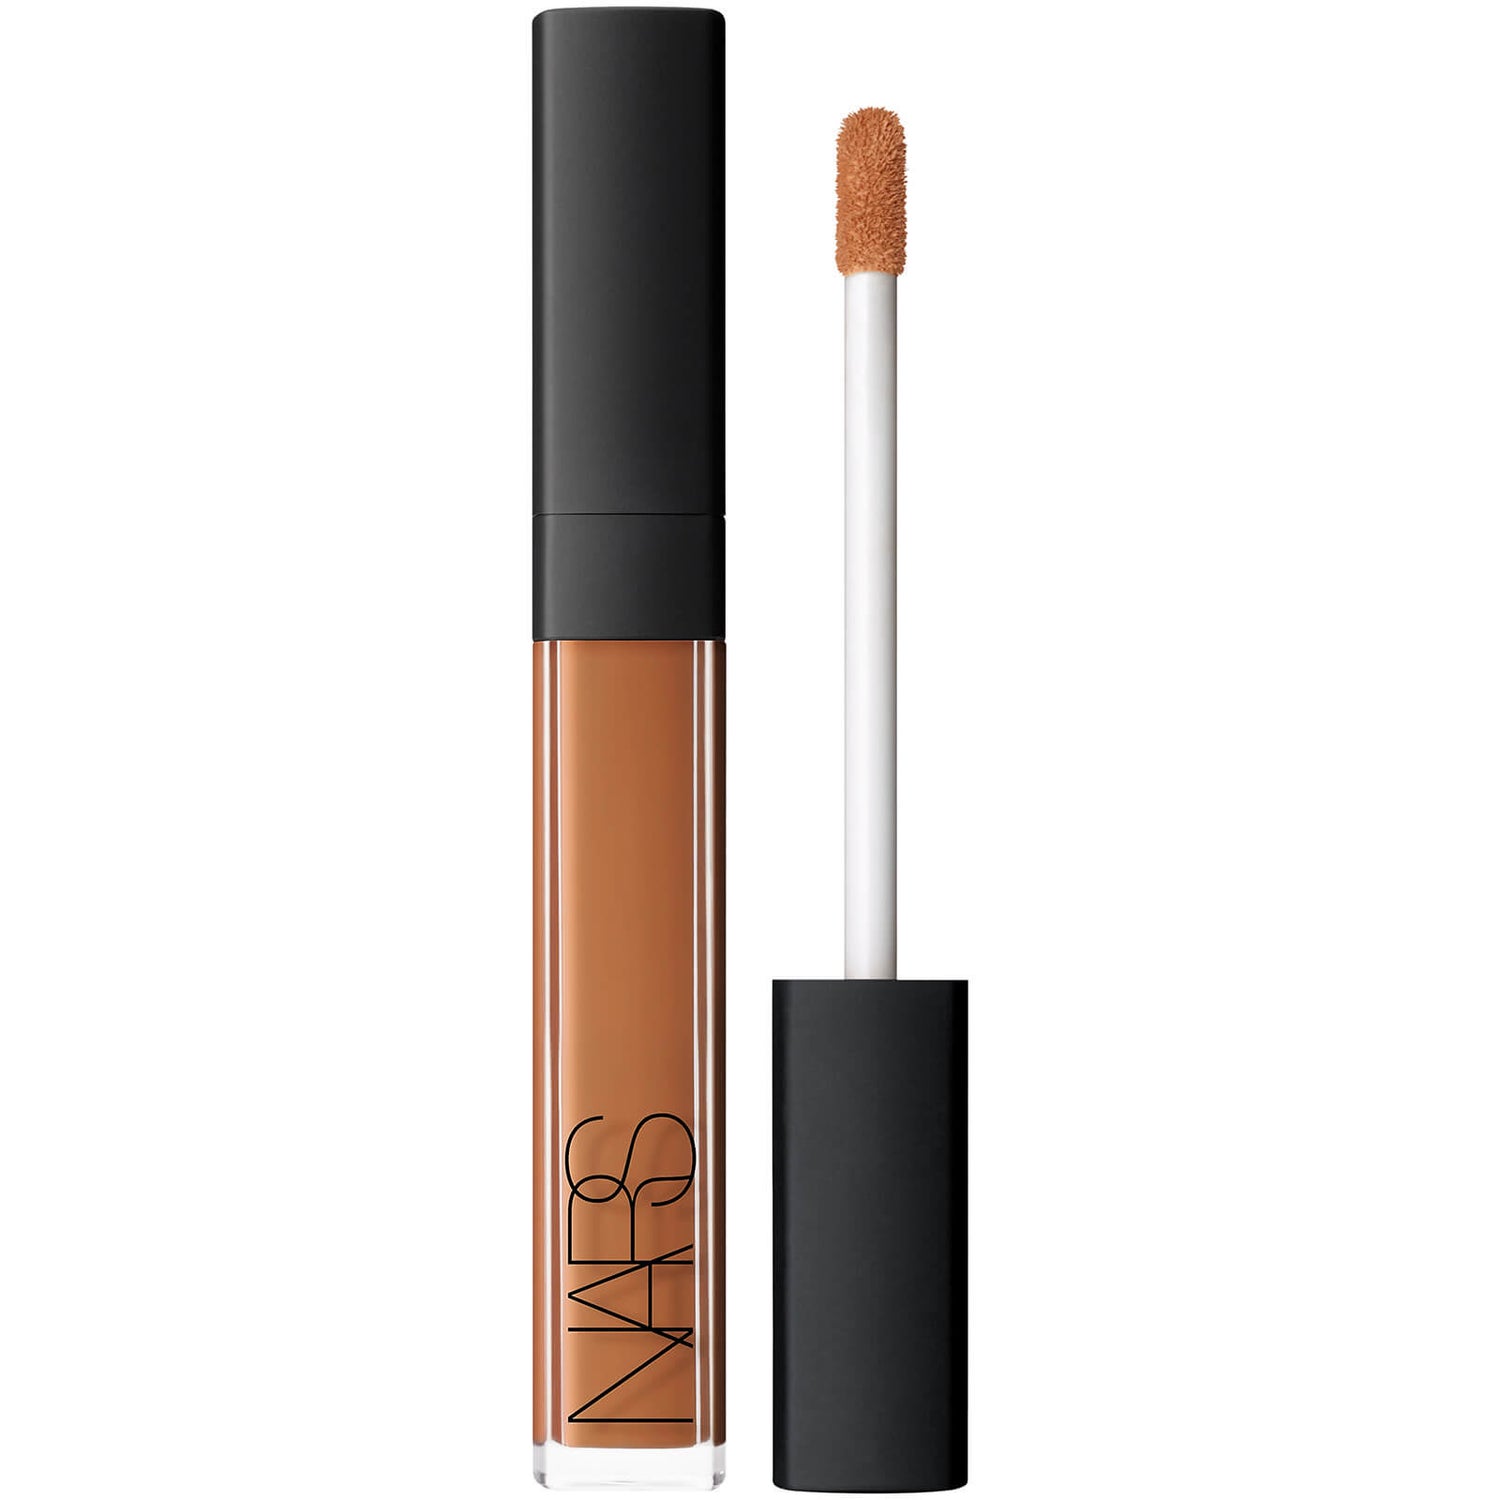 NARS Cosmetics Radiant Creamy Concealer (Various Shades) how to minimise reduce shrink cover pores naturally